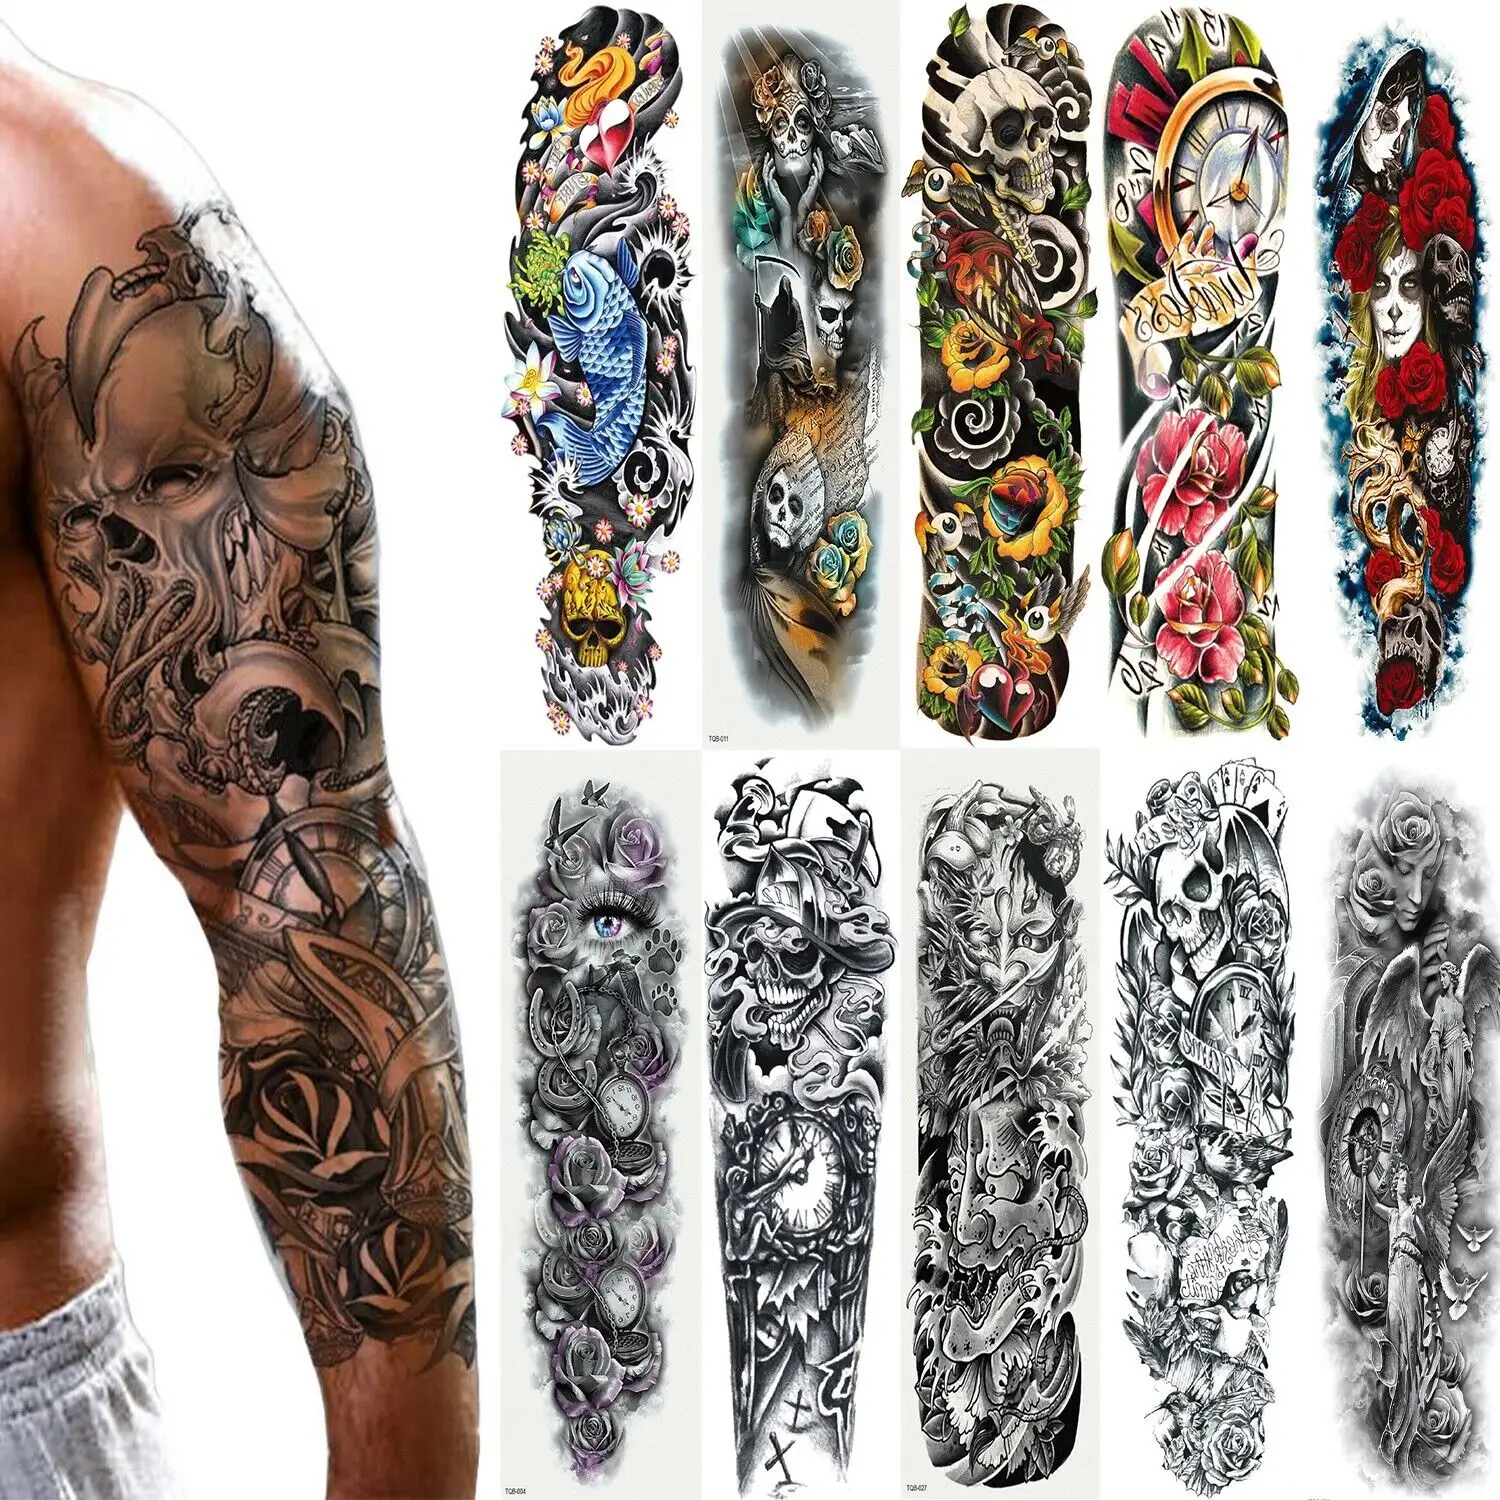 Hot Sale Large Size Waterproof Arm Tatoo Stickers Full Sleeve Long Lasting Fake Body Temporary Tattoos For Men